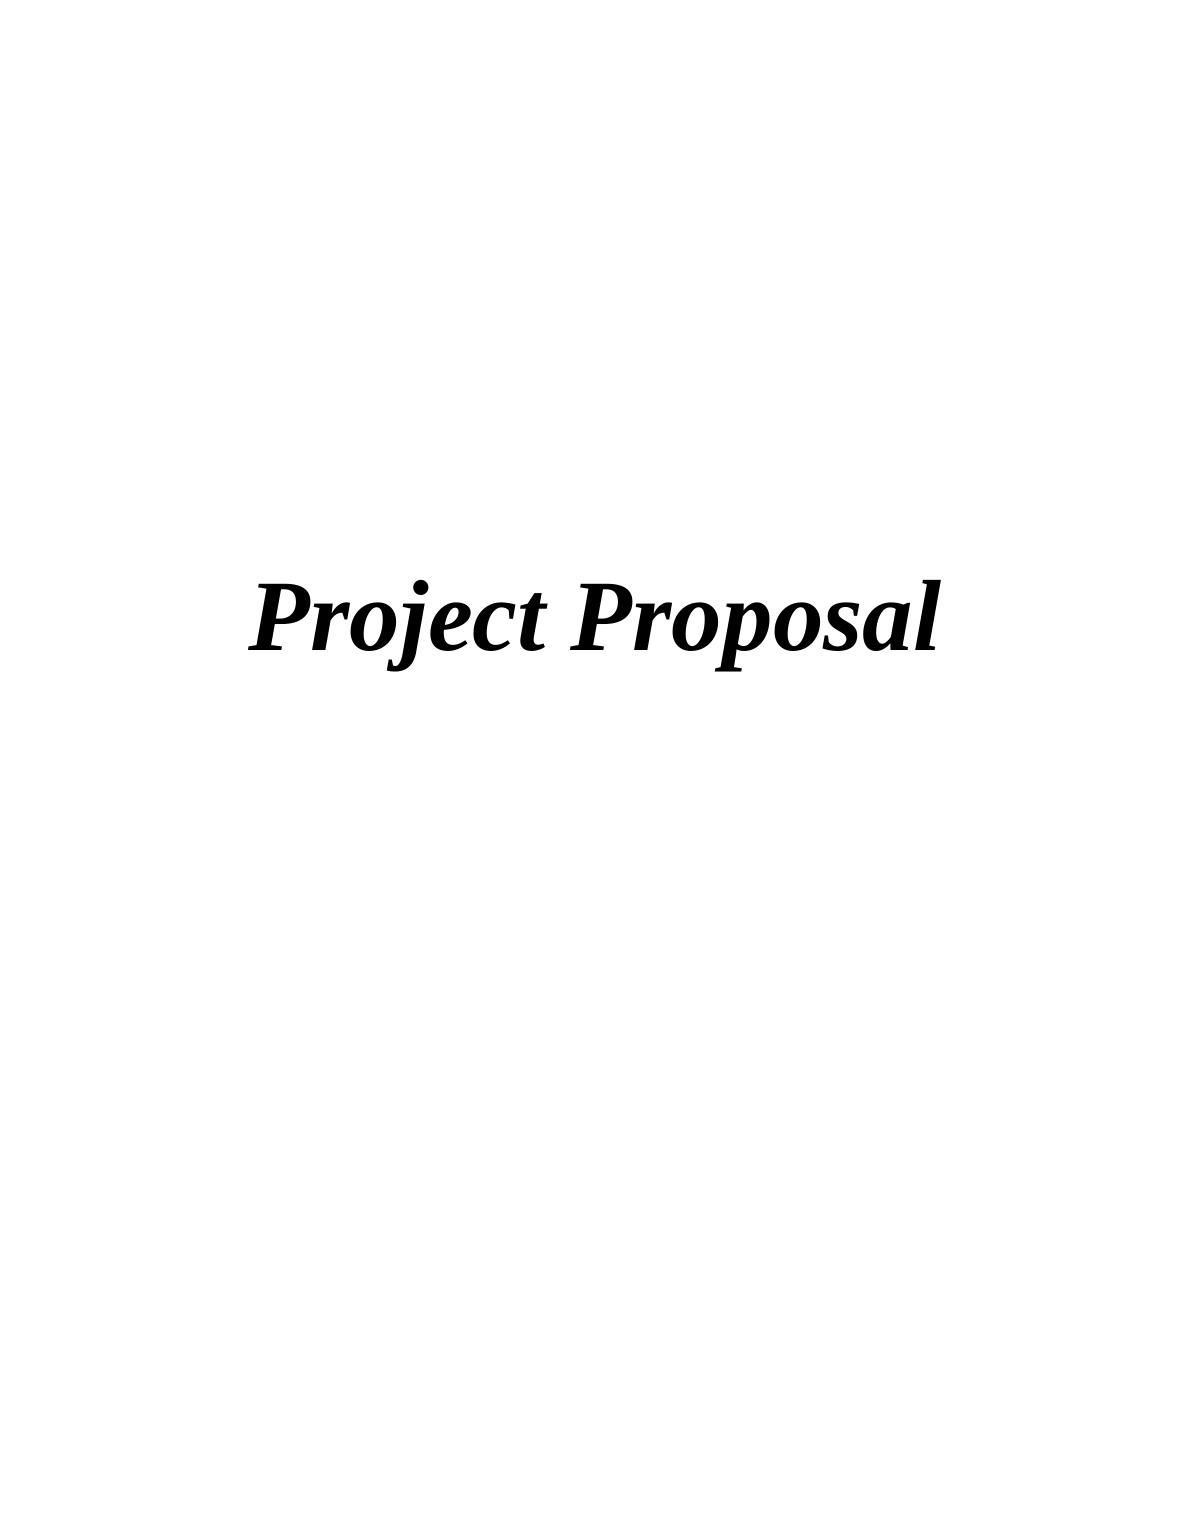 Project Proposal Assignment - Case Study of WUR_1